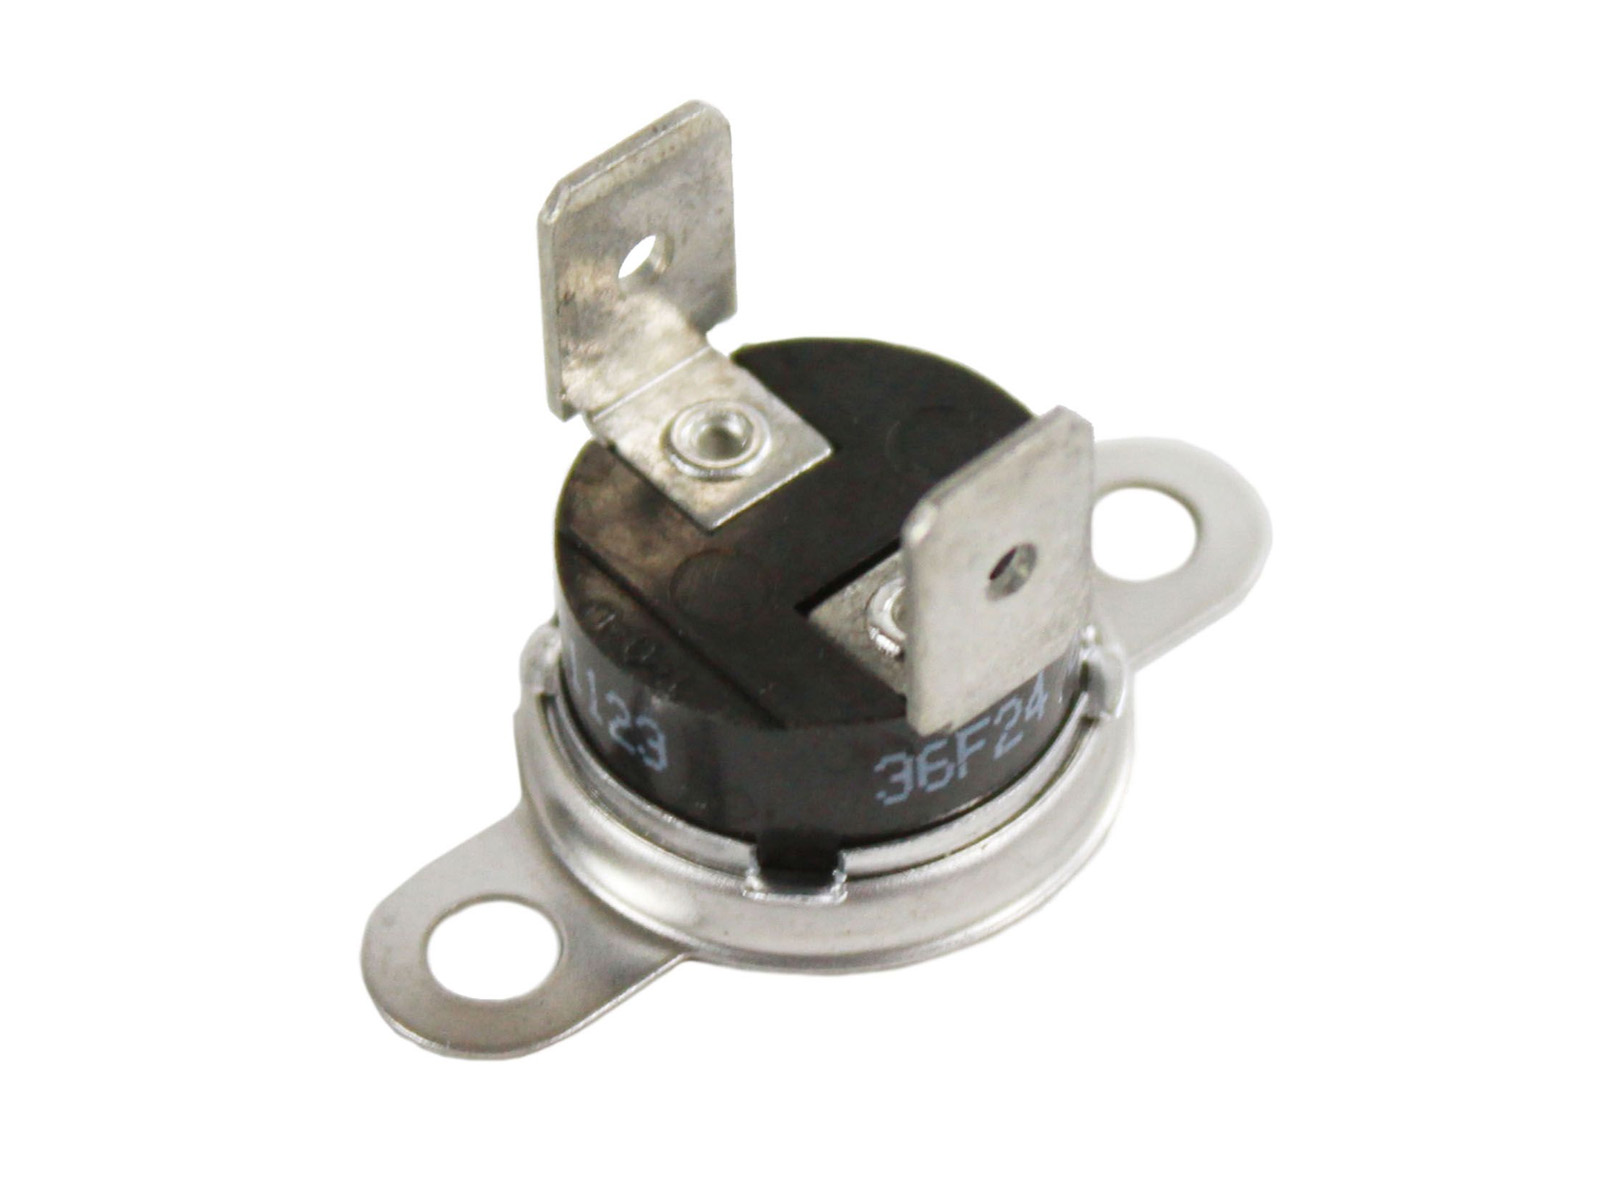 ClimaTek Upgraded Dryer Thermal Limit Switch fits Crosley Electrolux 146062-00 146062-000 1489053